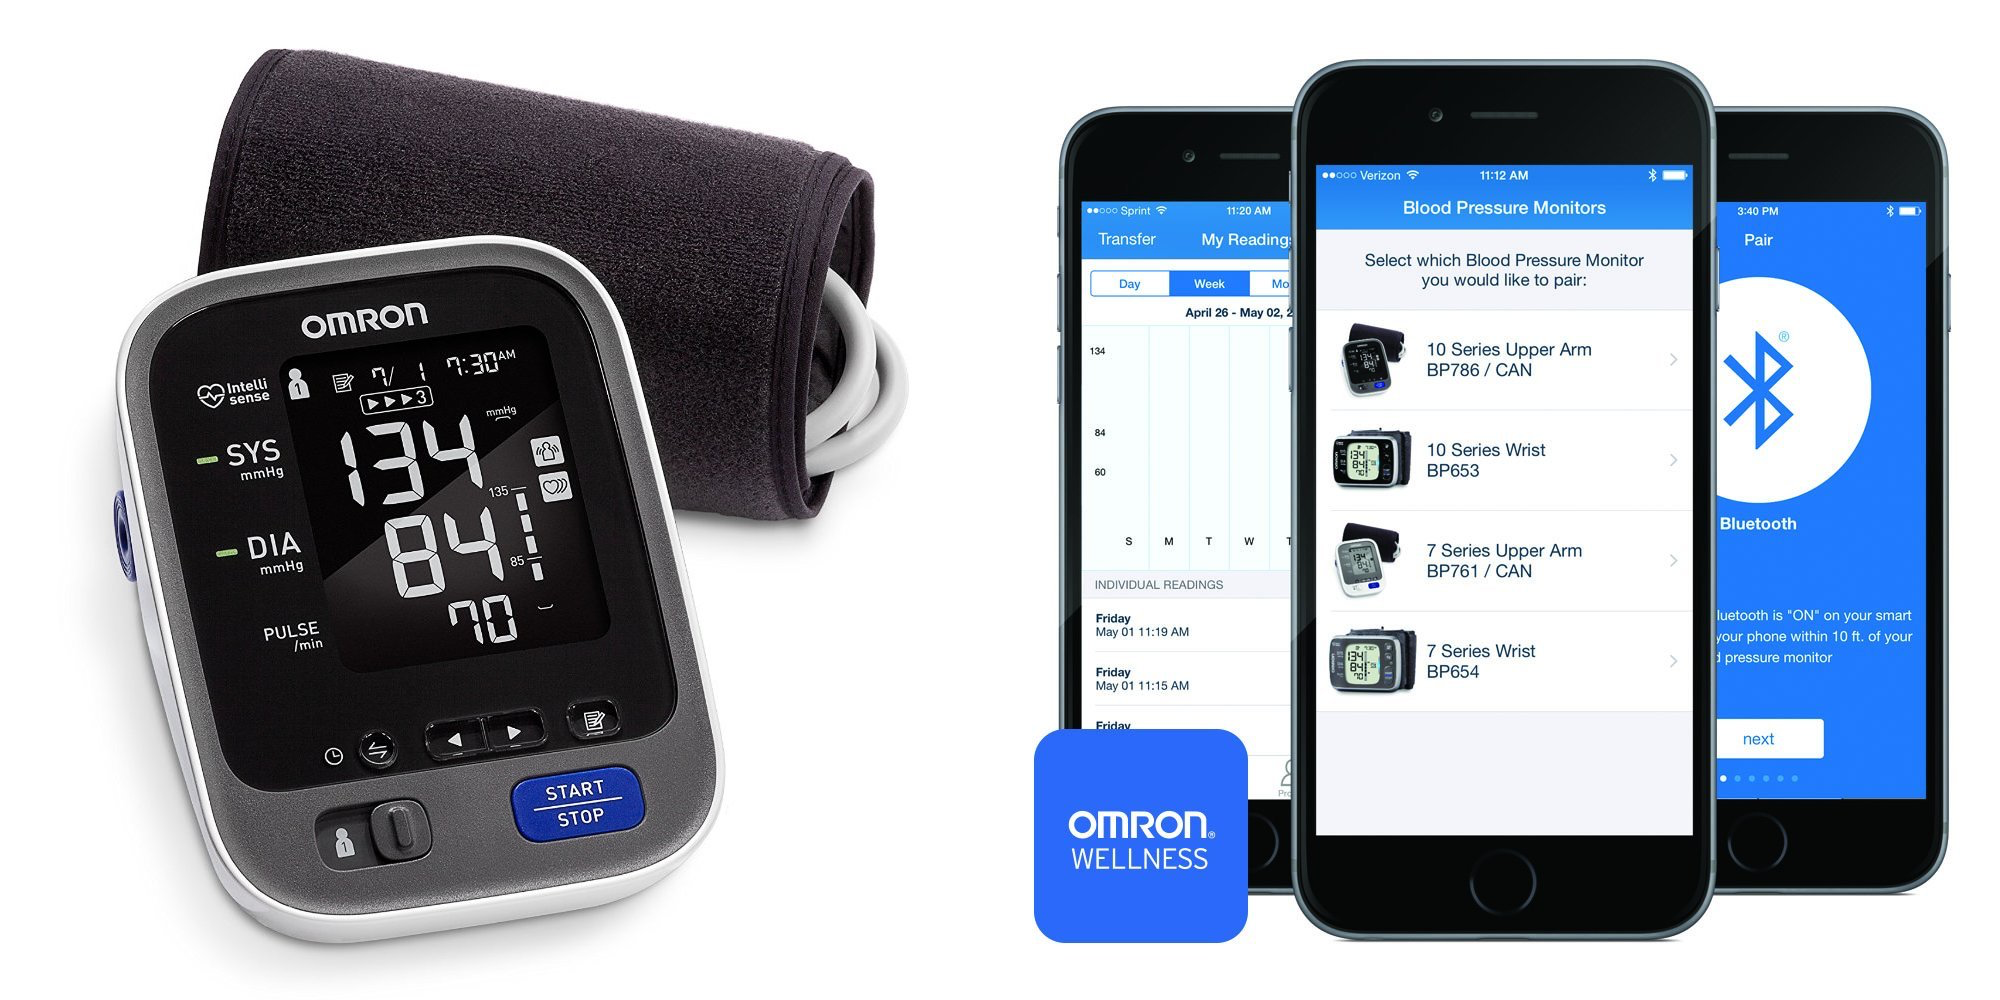 https://9to5toys.com/wp-content/uploads/sites/5/2016/08/omron-smart-bluetooth-blood-pressure-monitor.png